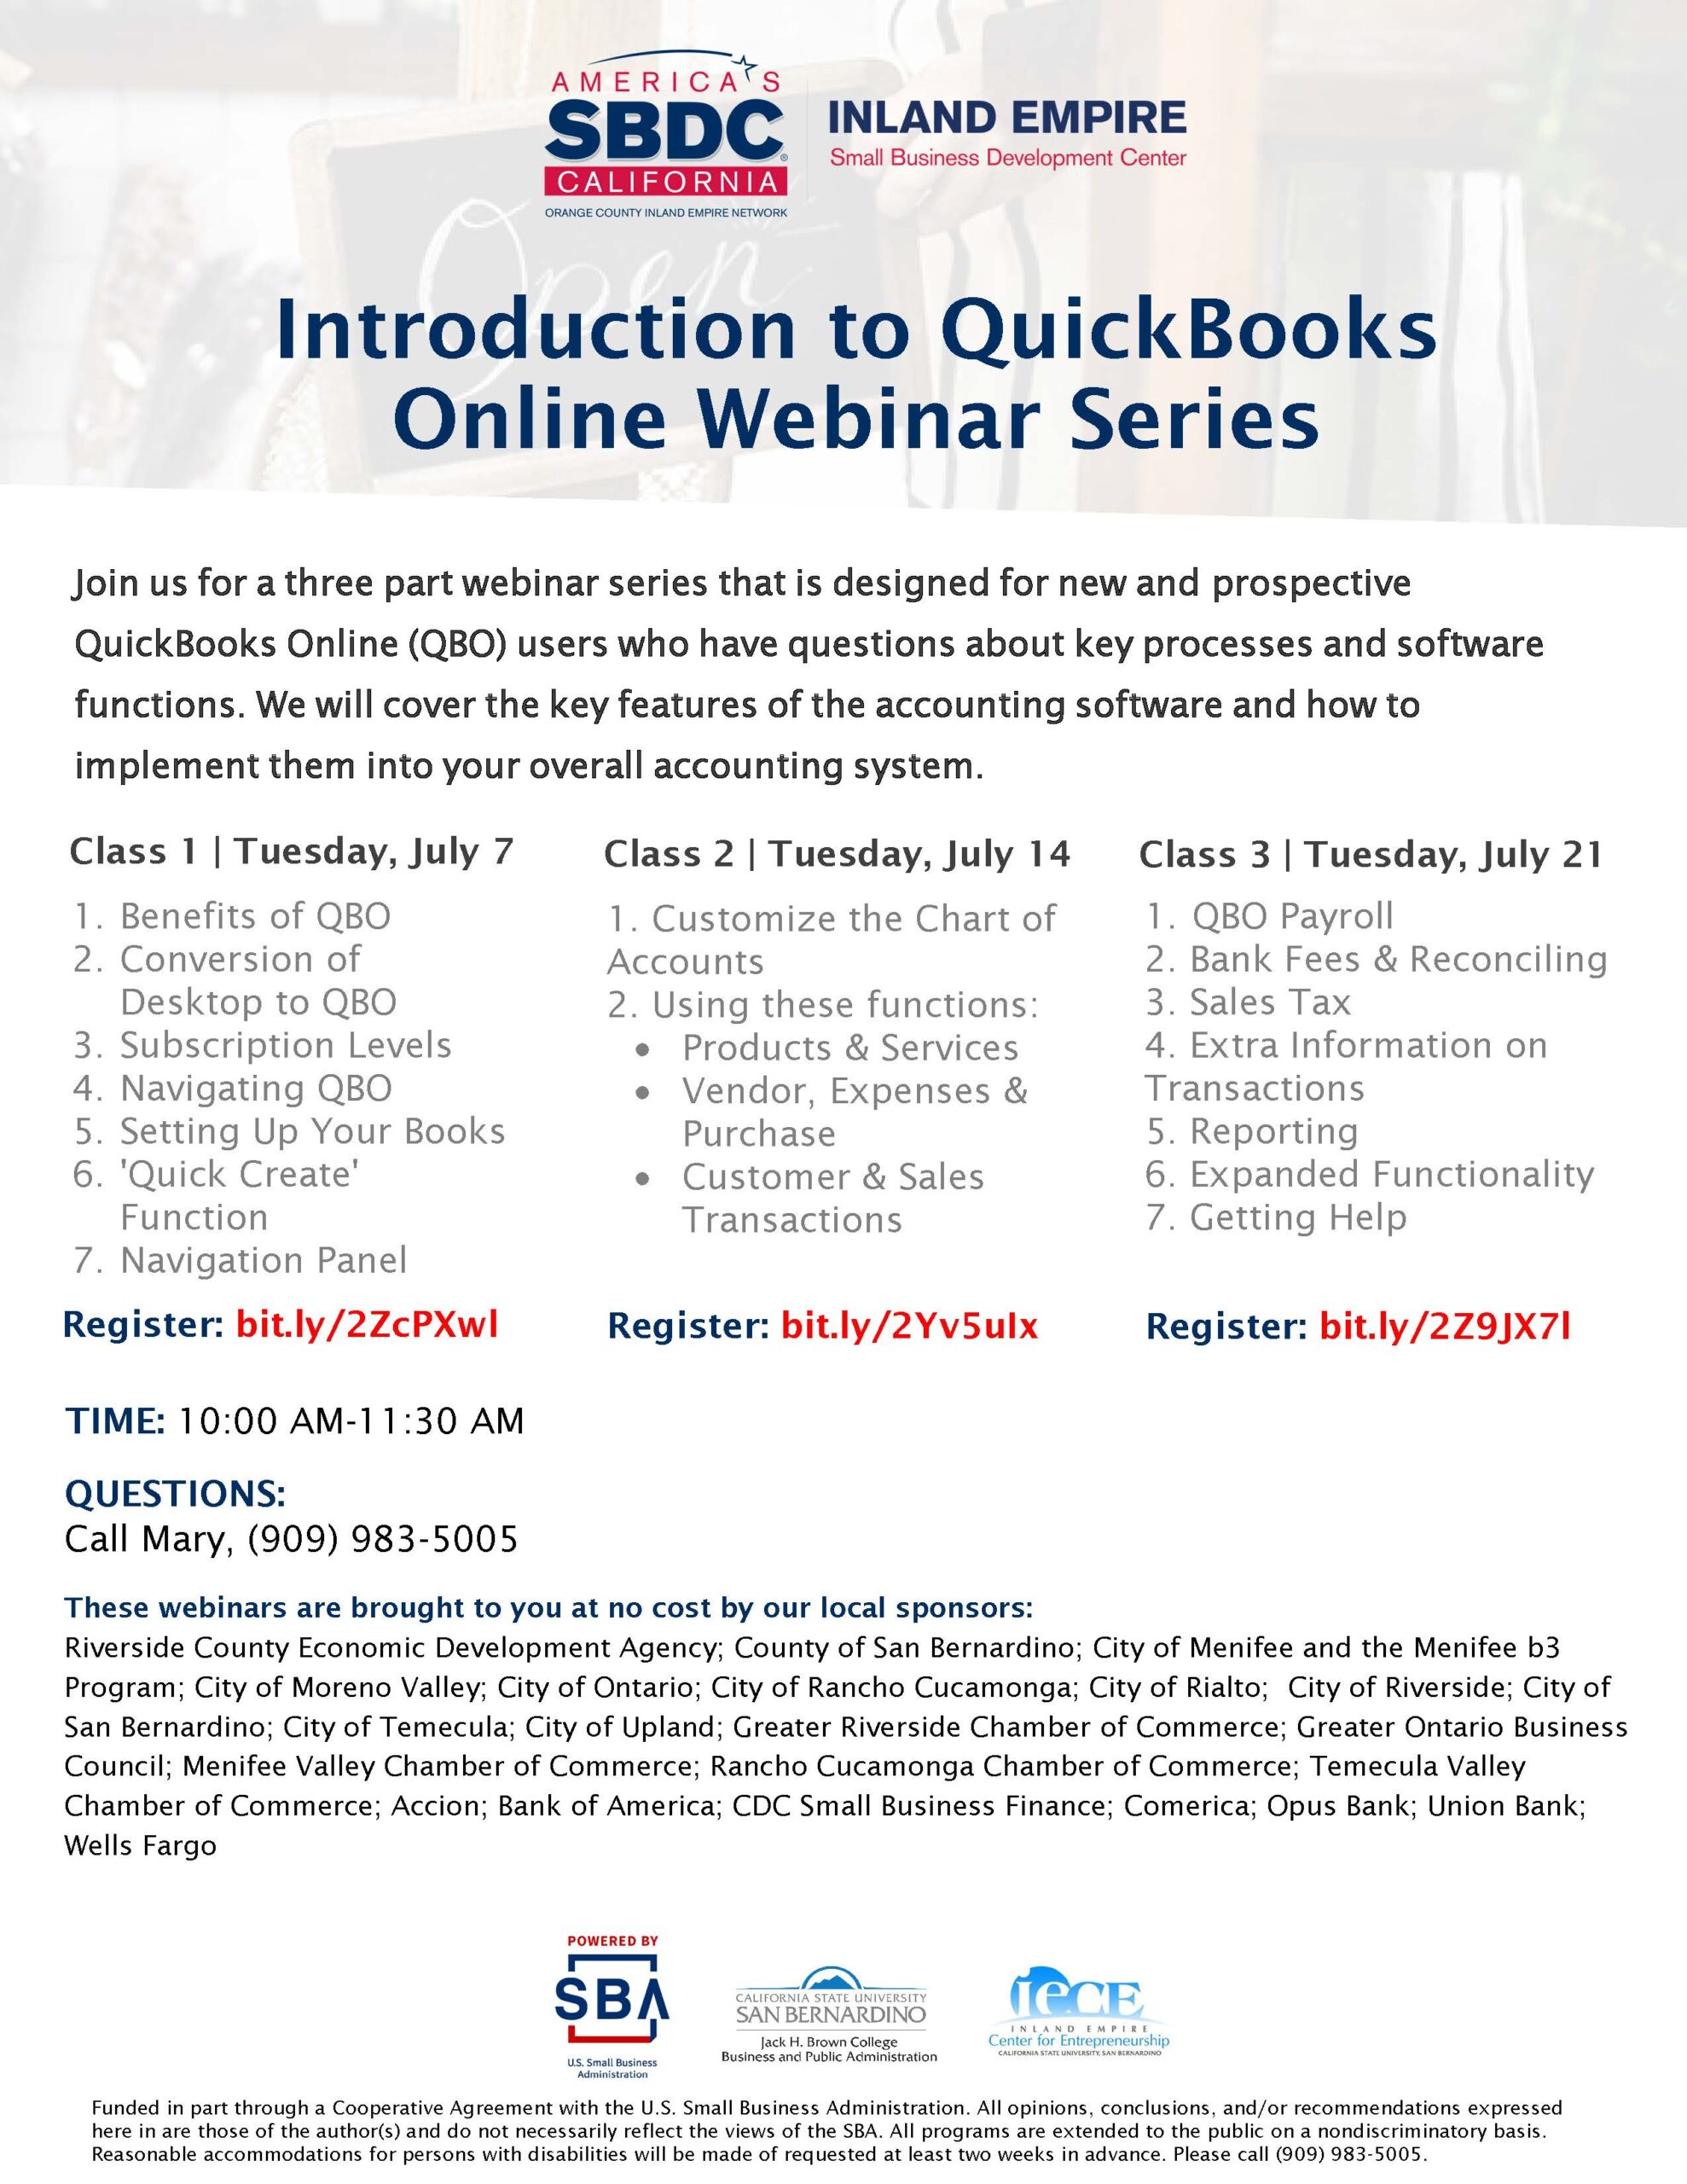 Introduction to QuickBooks Online (Class 3)